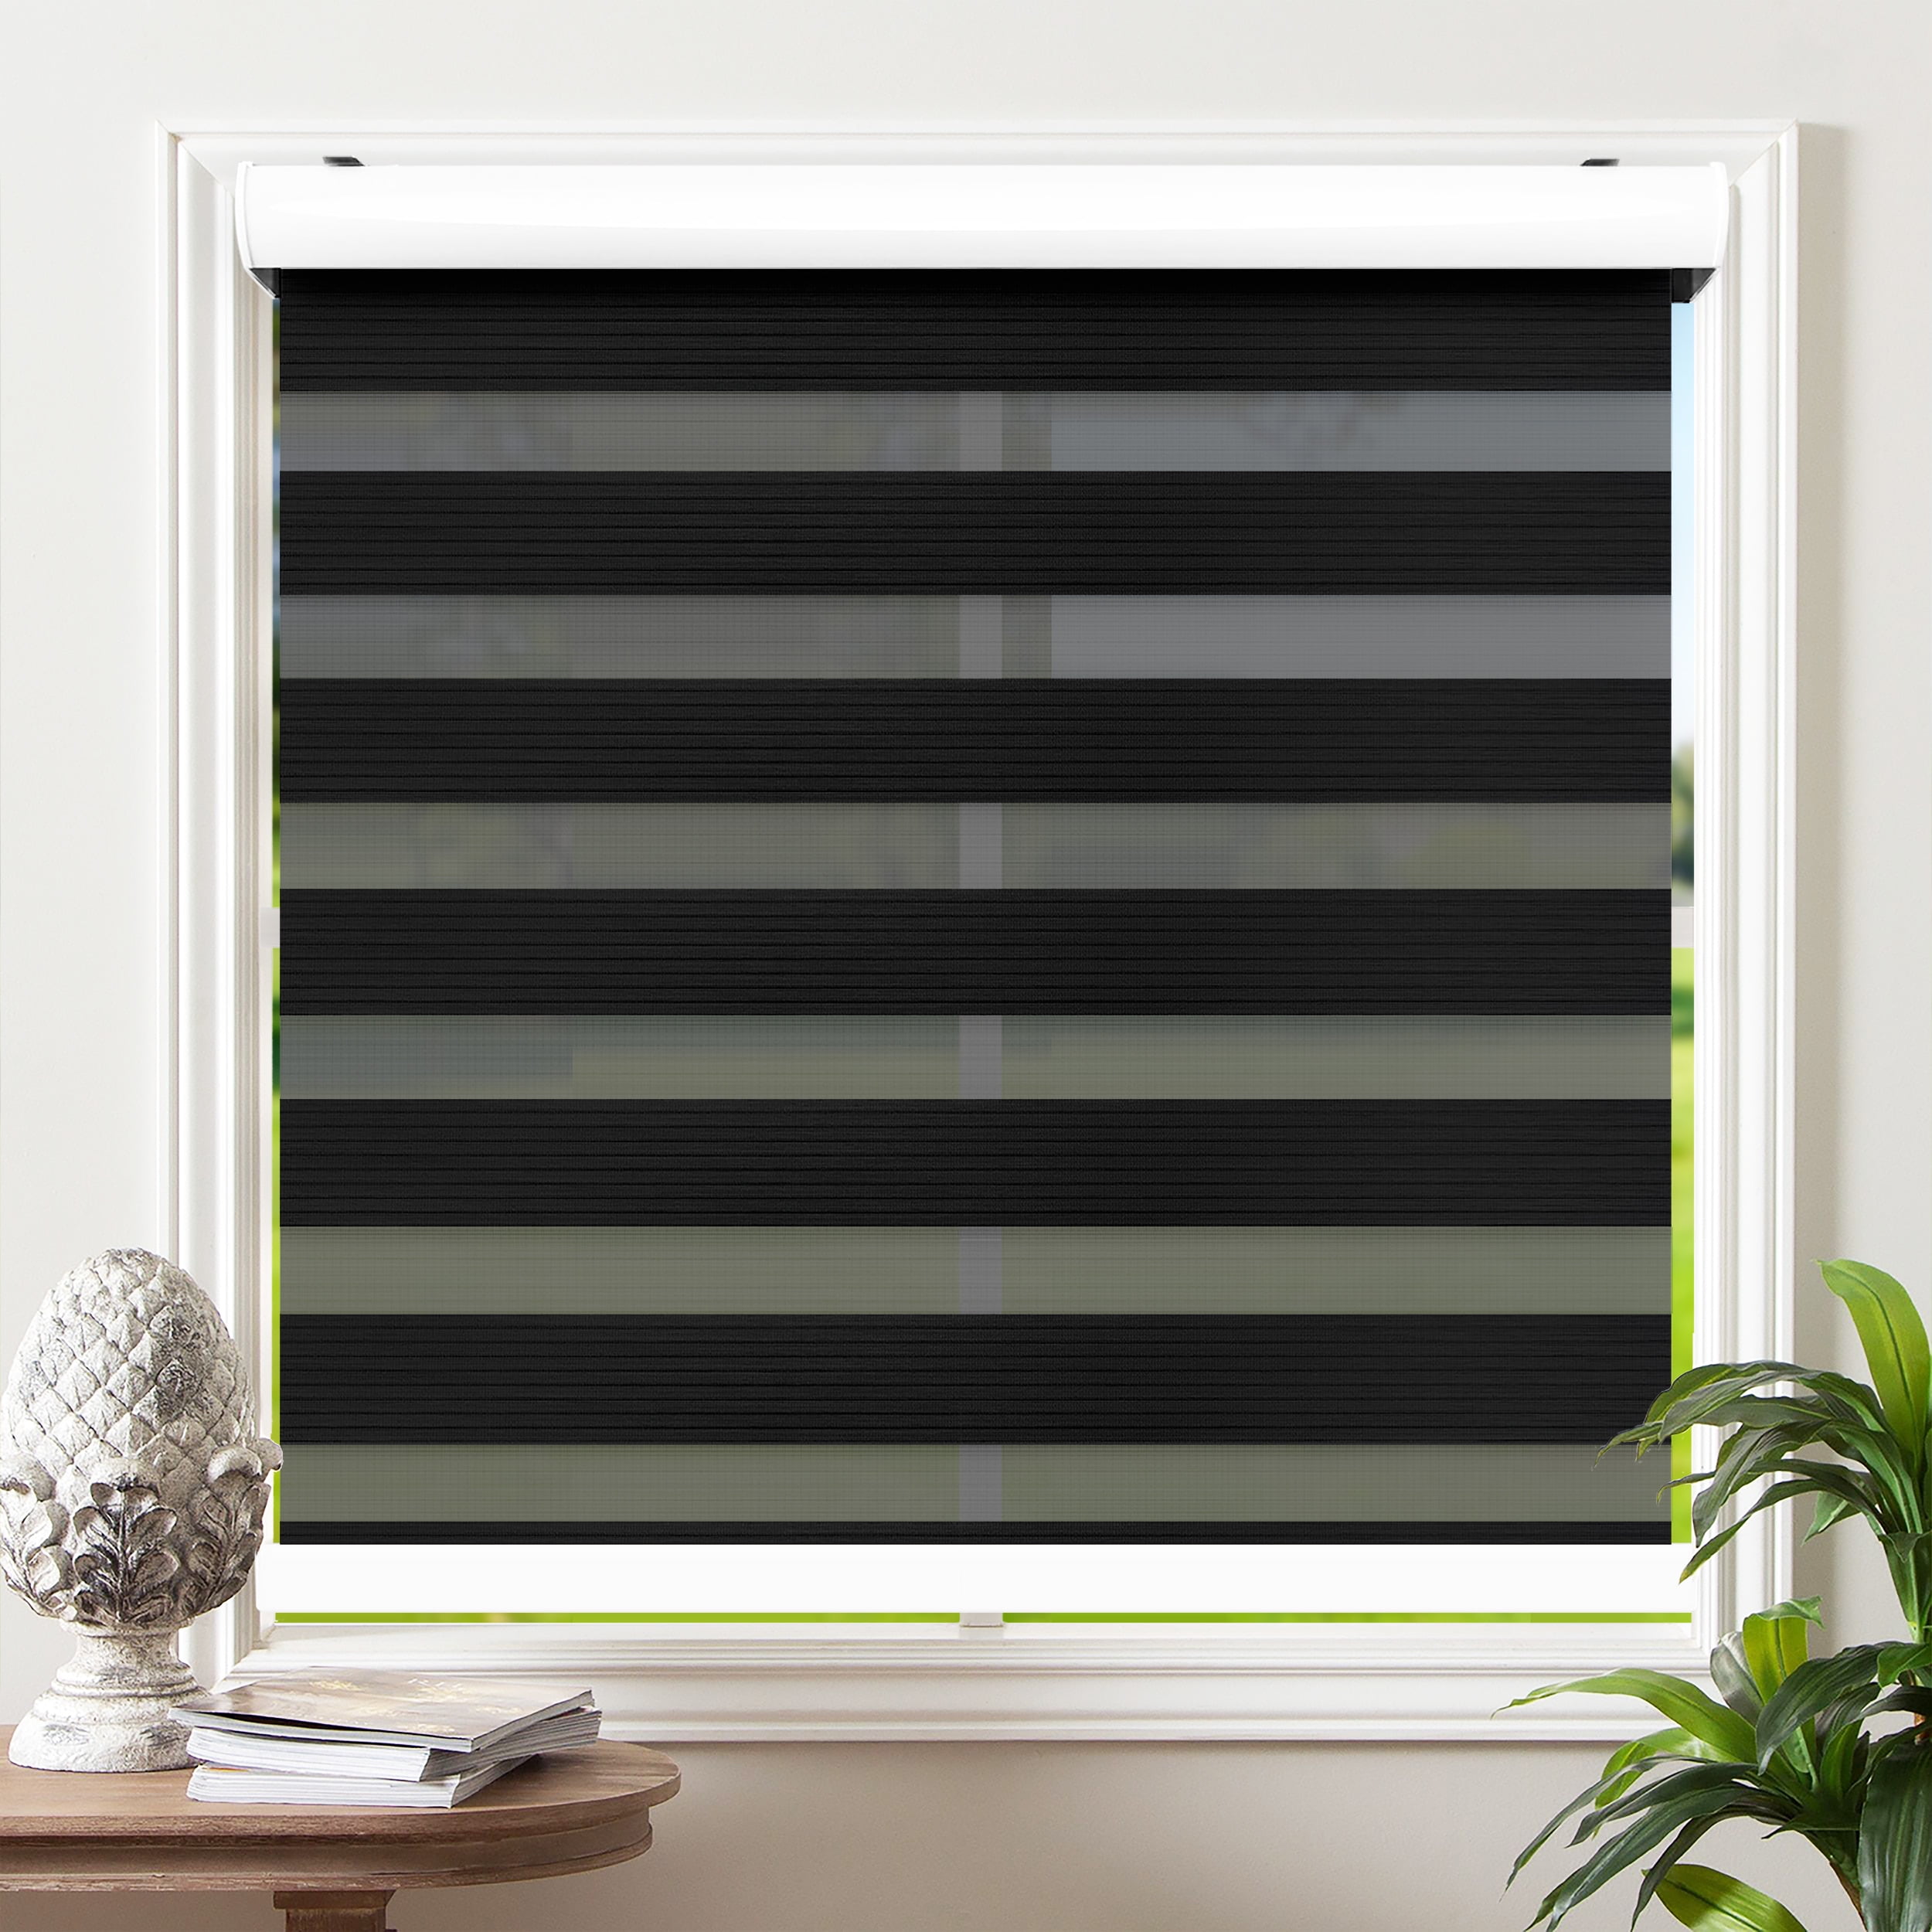 29 W X 72 H-Black LUCKUP Horizontal Window Shade Blinds with Valance Cover Zebra Dual Roller Blinds Day and Night Curtains